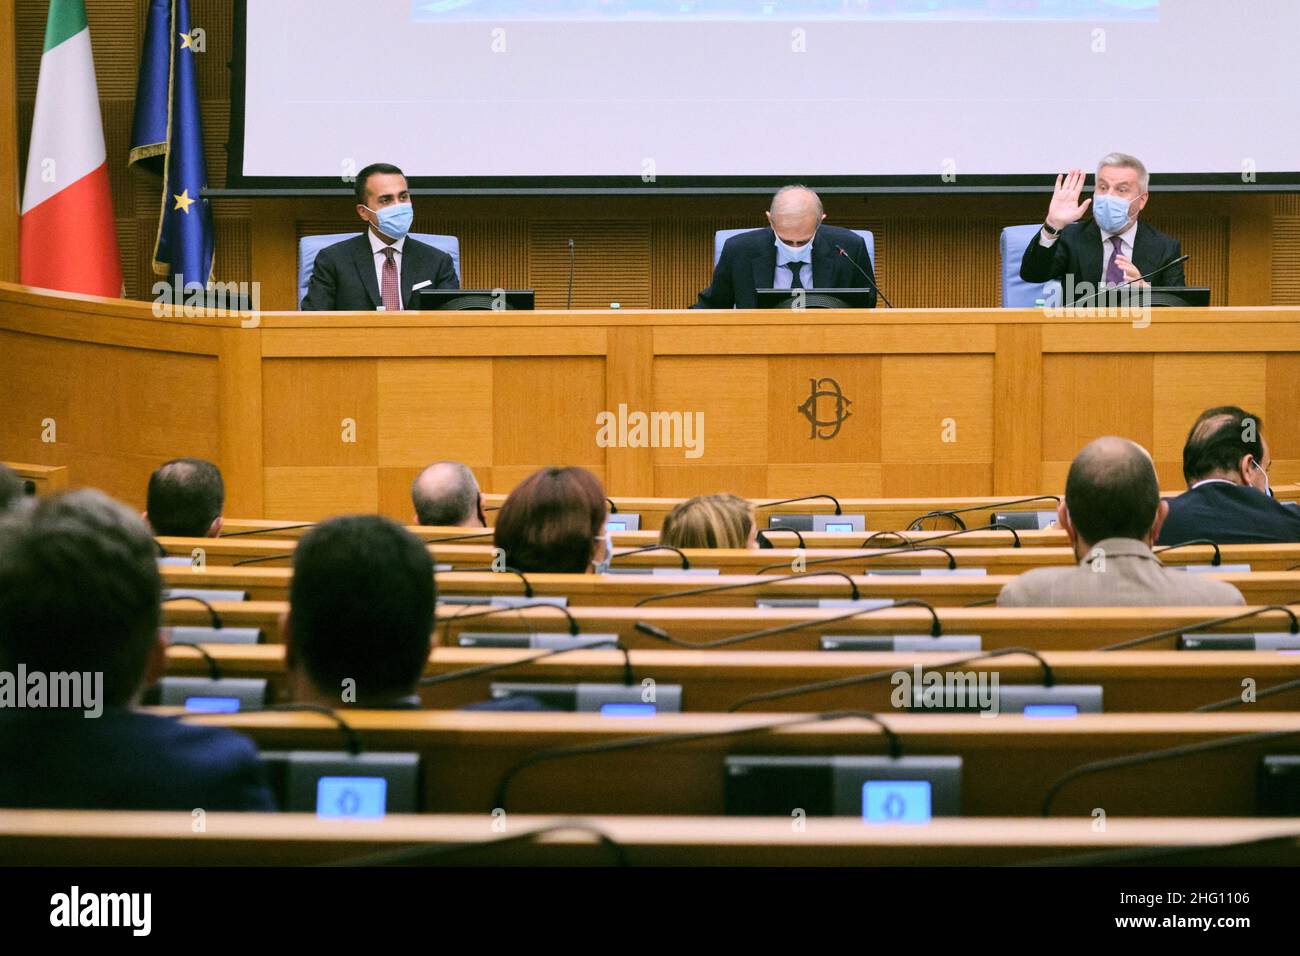 Mauro Scrobogna /LaPresse August 24, 2021 Rome, Italy Senate - foreign and defense commissions on Afghanistan In the photo: Defense Minister Lorenzo Guerini and Foreign Minister Luigi Di Maio heard by the Foreign and Defense Committees of the Chamber of Deputies and Senate on the situation in Afghanistan after the Taliban took power Stock Photo